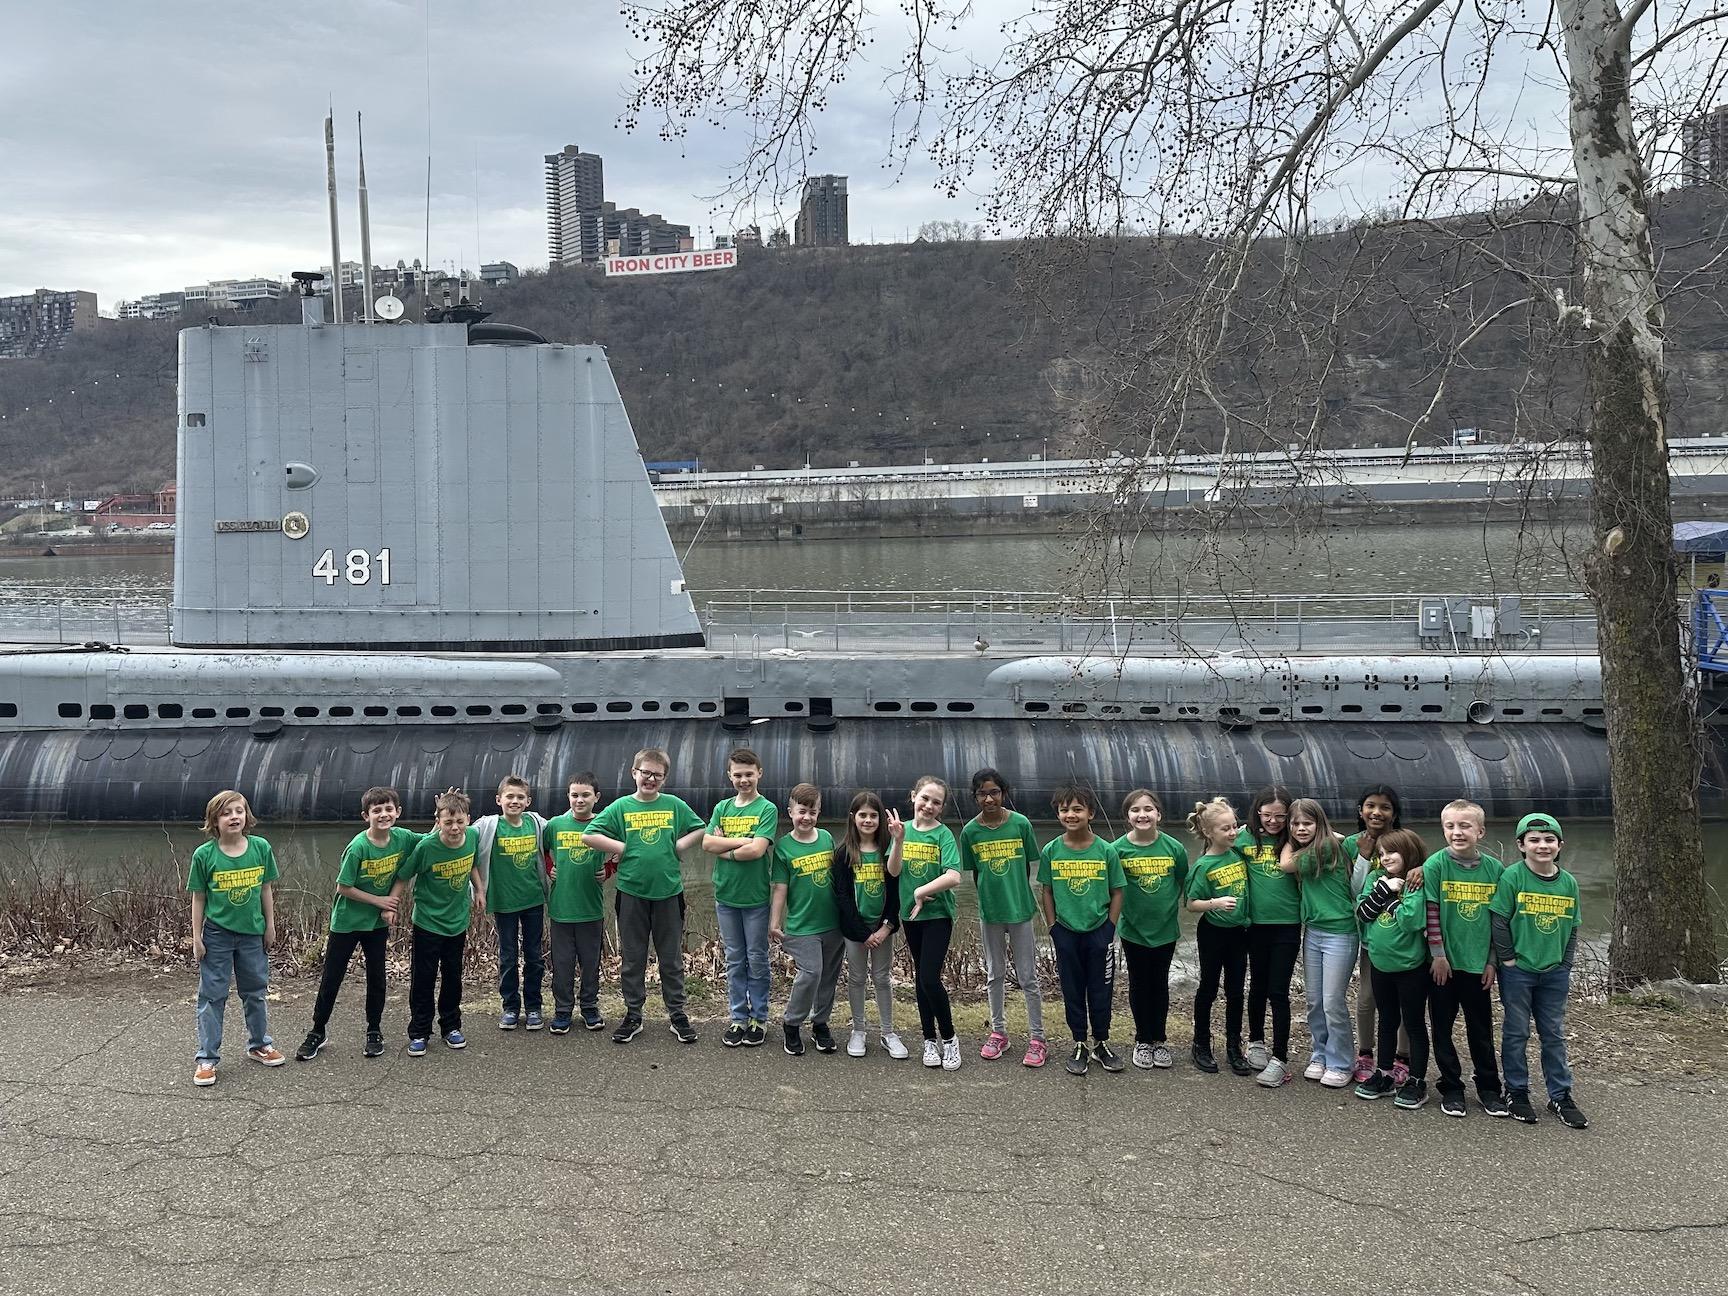 Mr. Nese’s McCullough class pauses for a photo outside the submarine